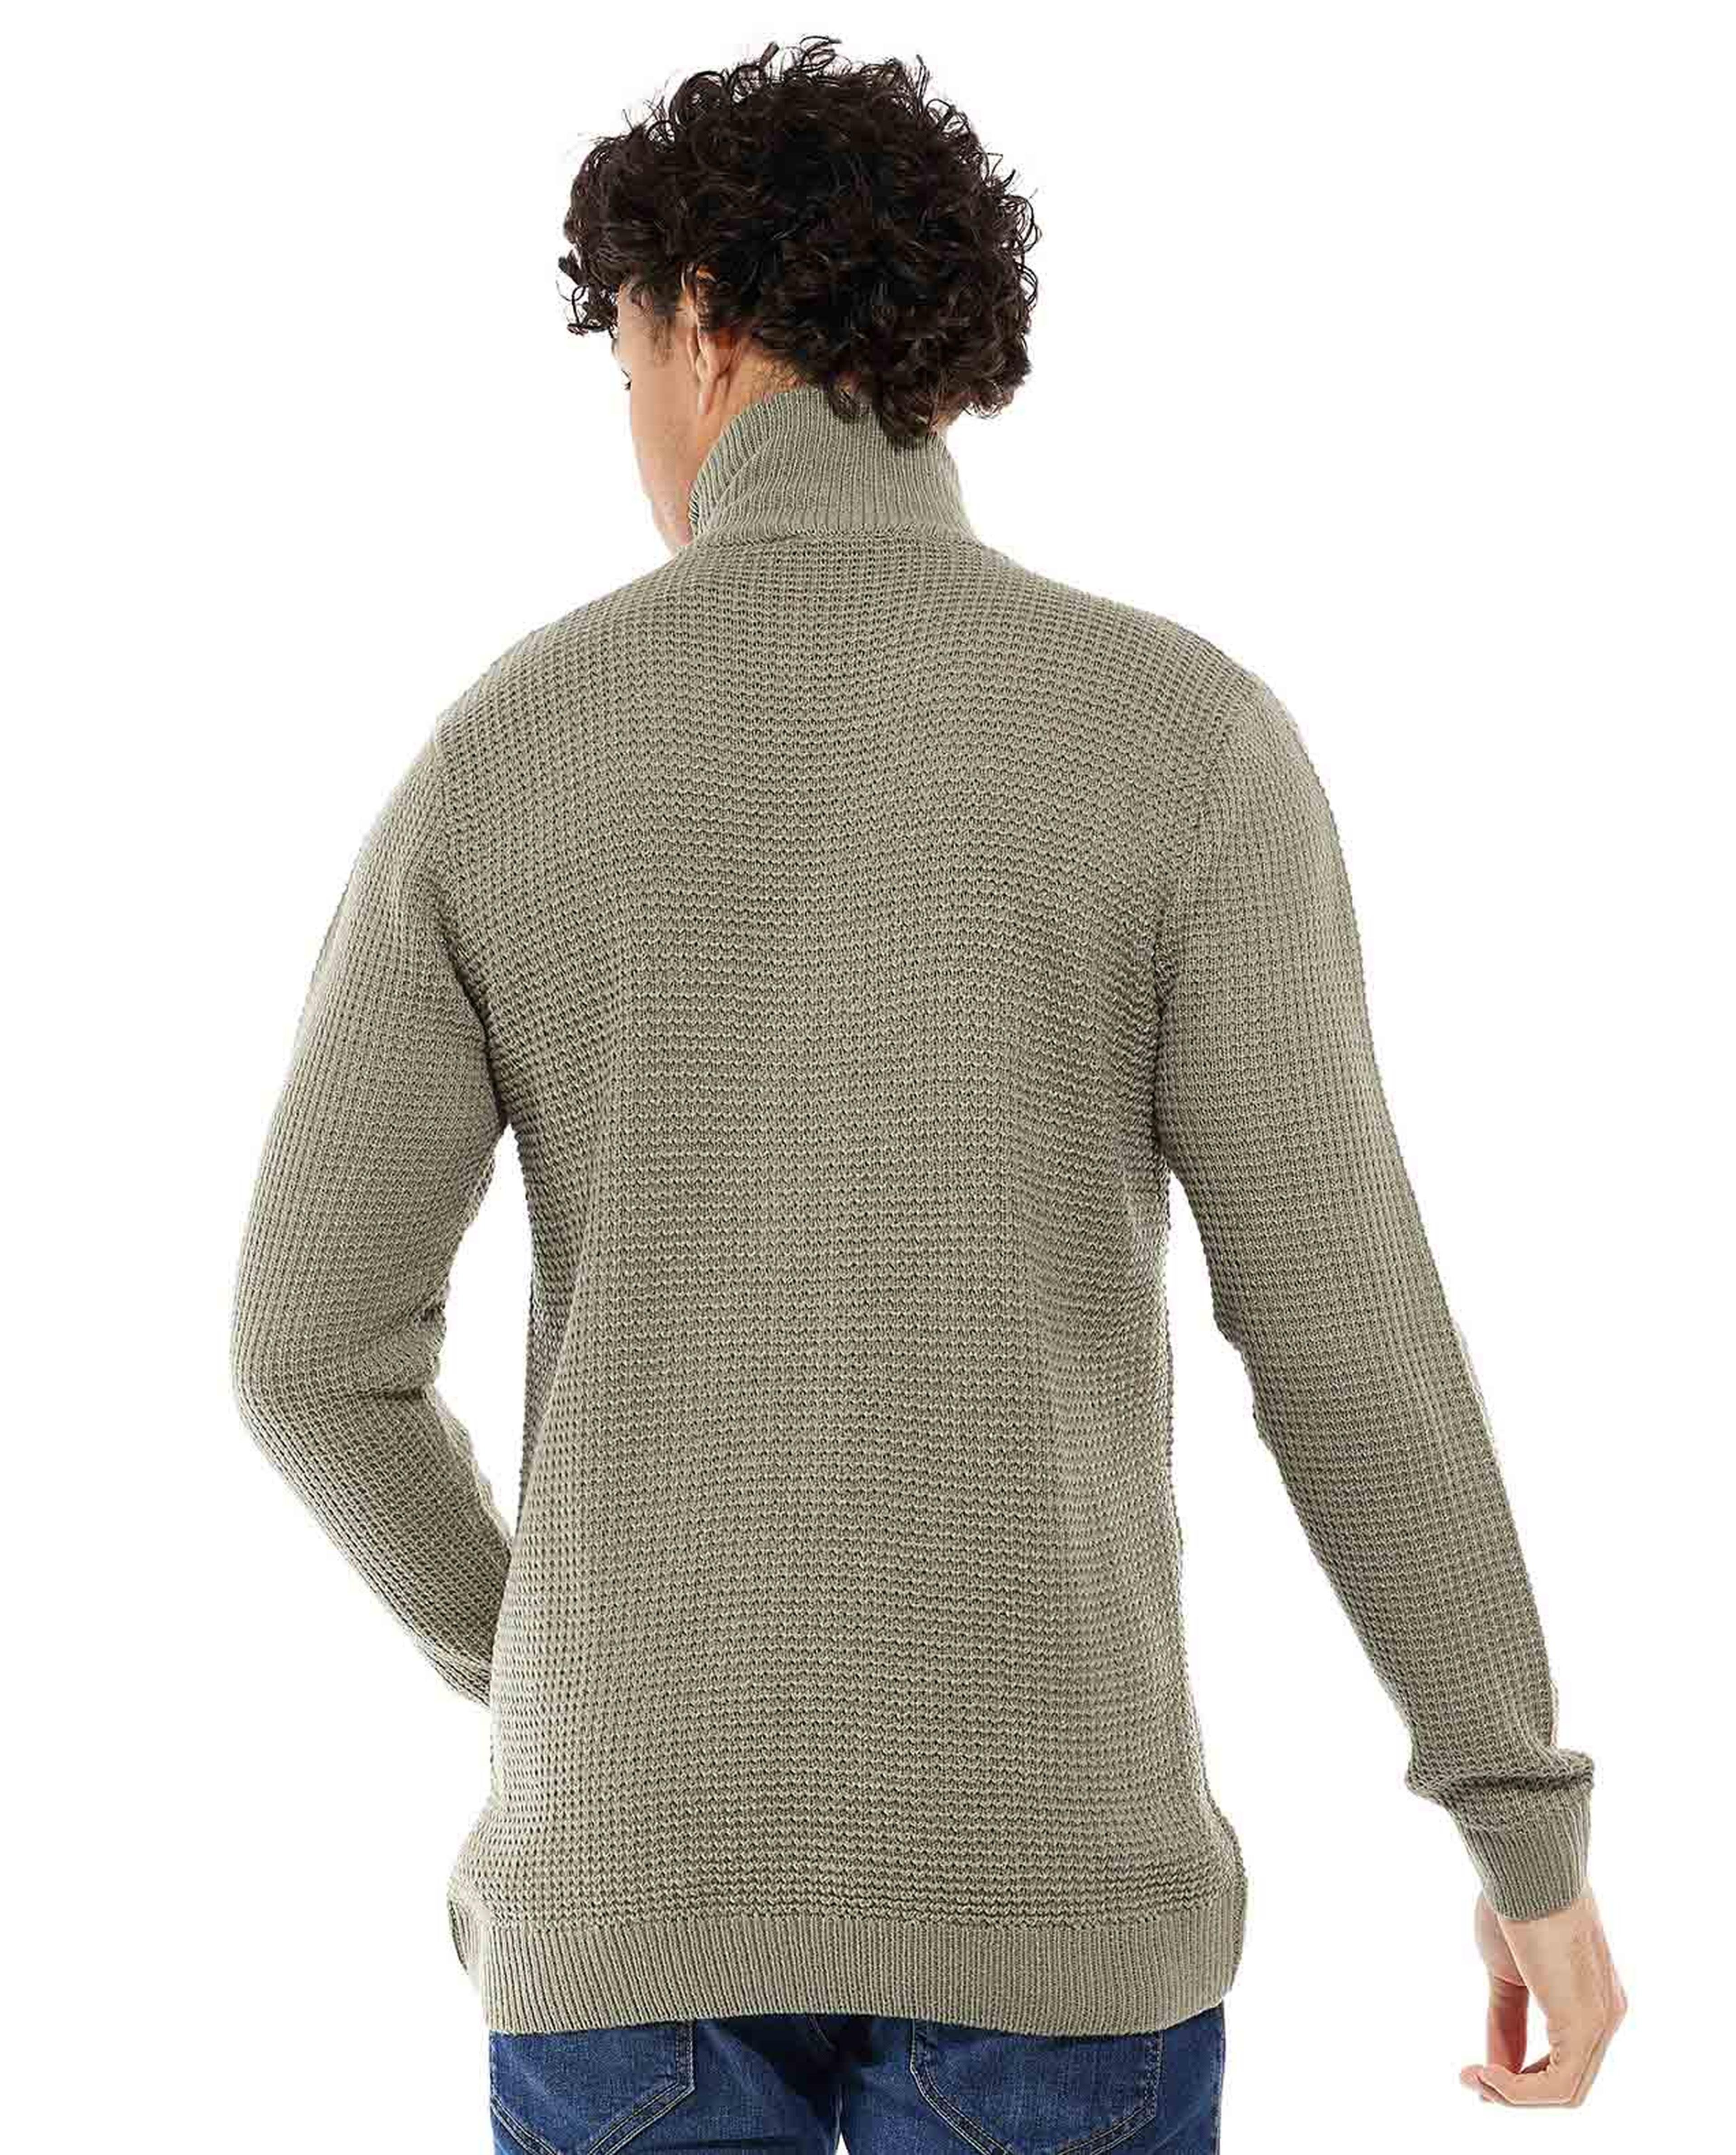 Knitted Sweater with Zipper Closure